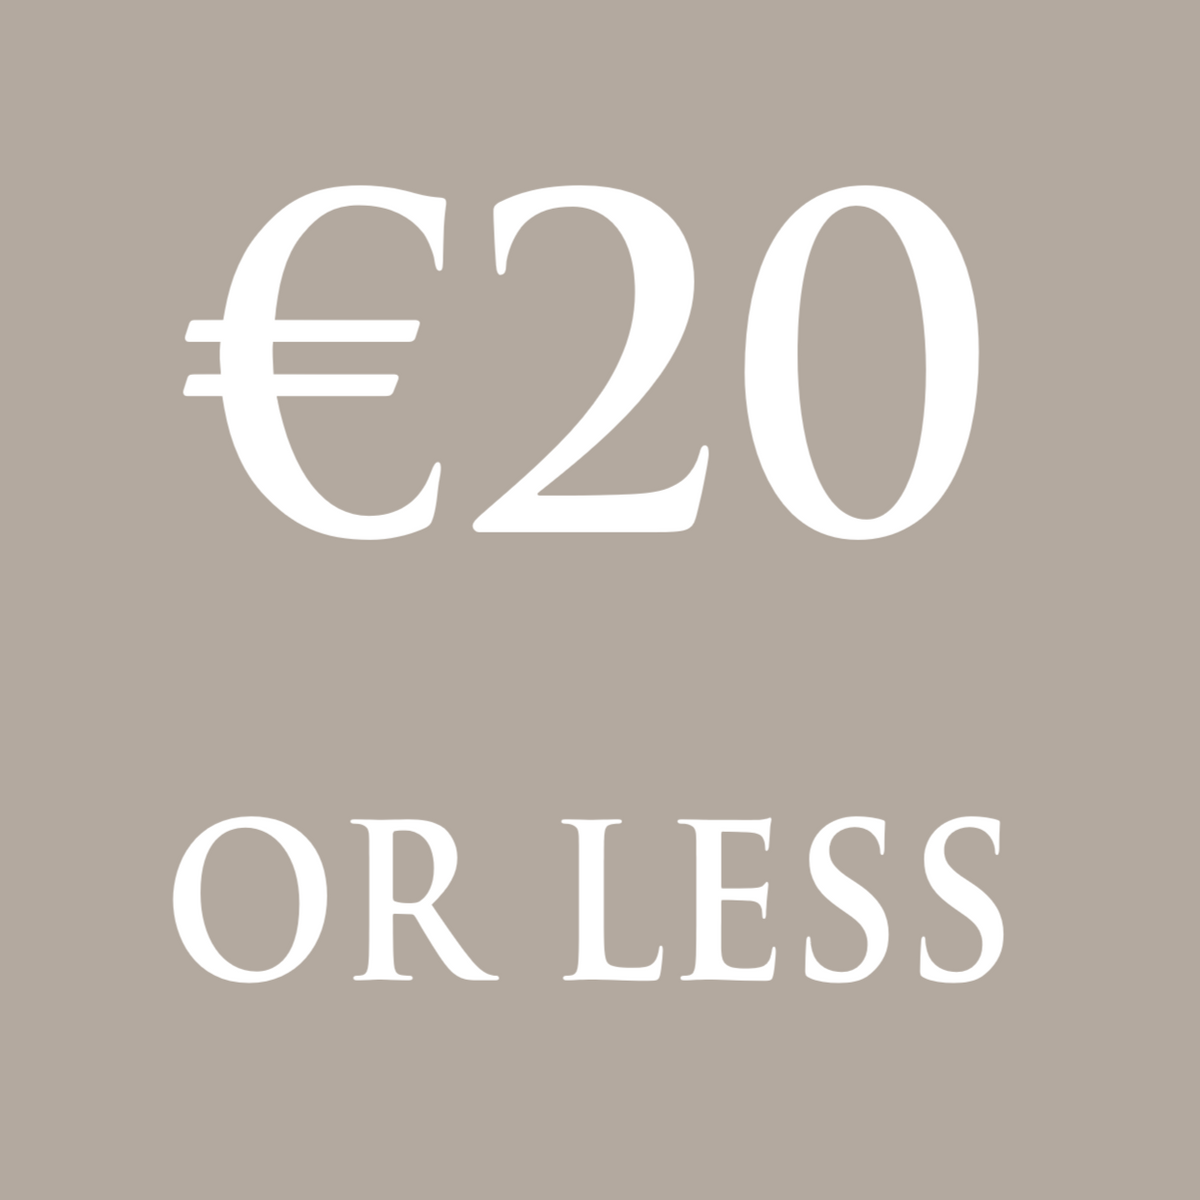 €20 or less